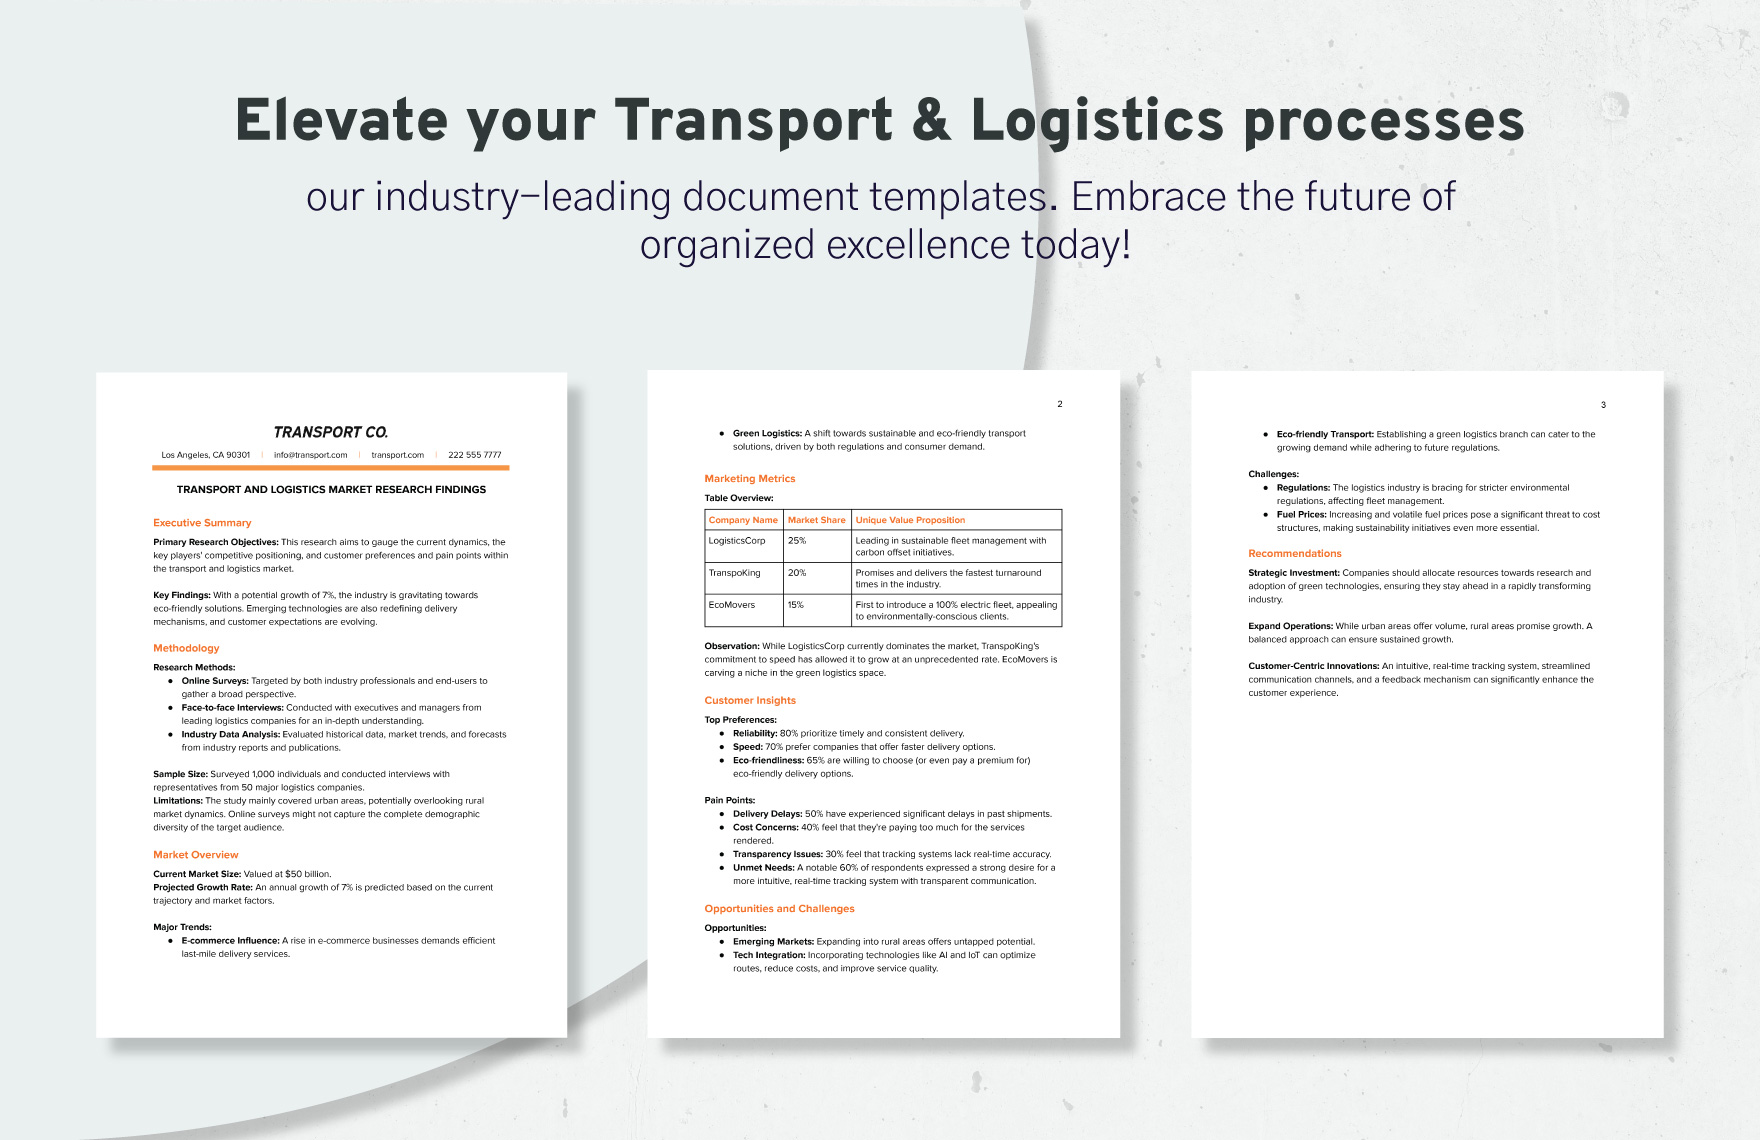 Transport and Logistics Market Research Findings Template